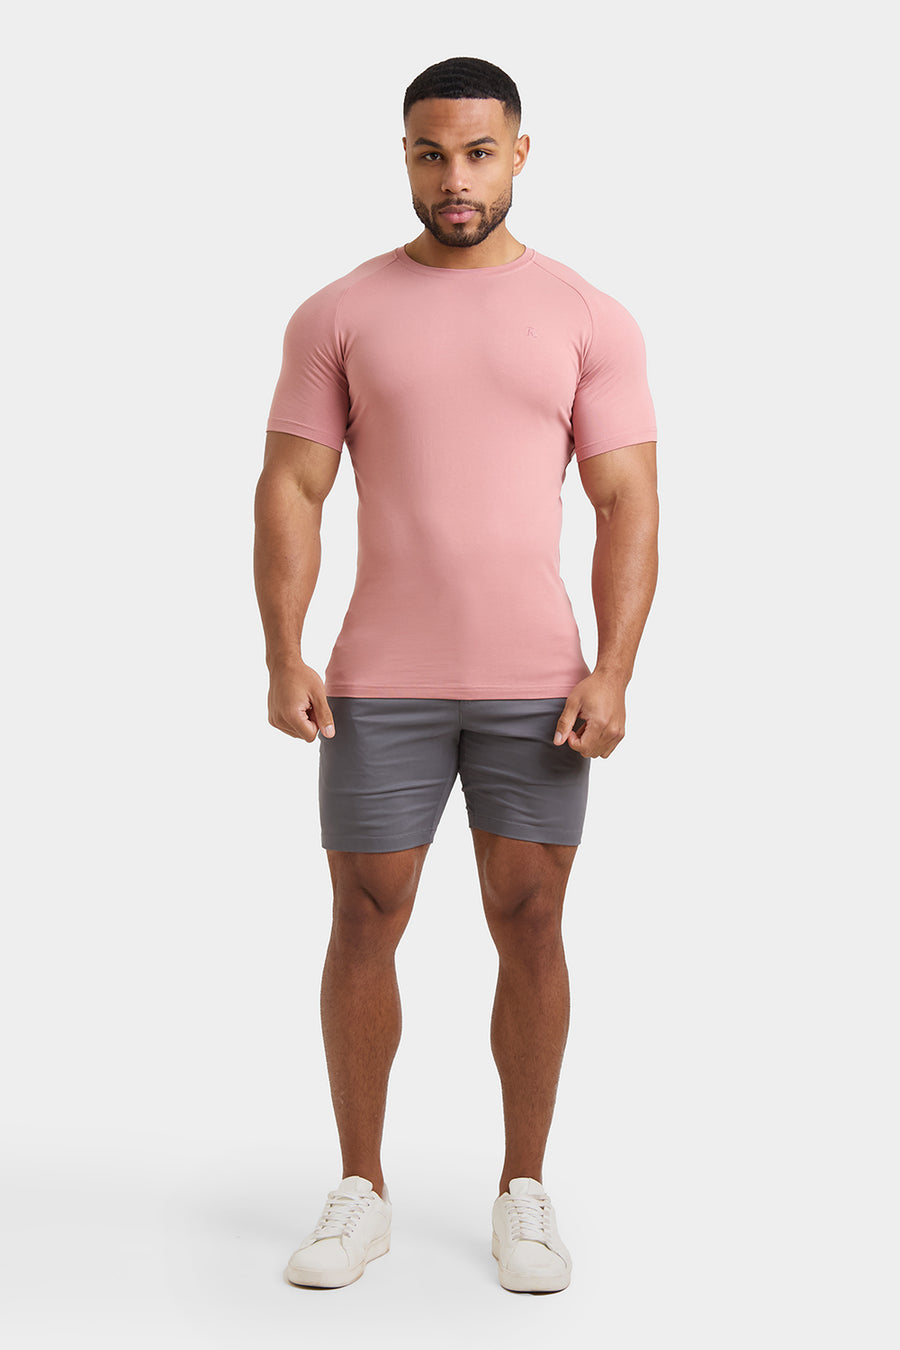 Athletic Fit T-Shirt in Bleached Terracotta - TAILORED ATHLETE - USA